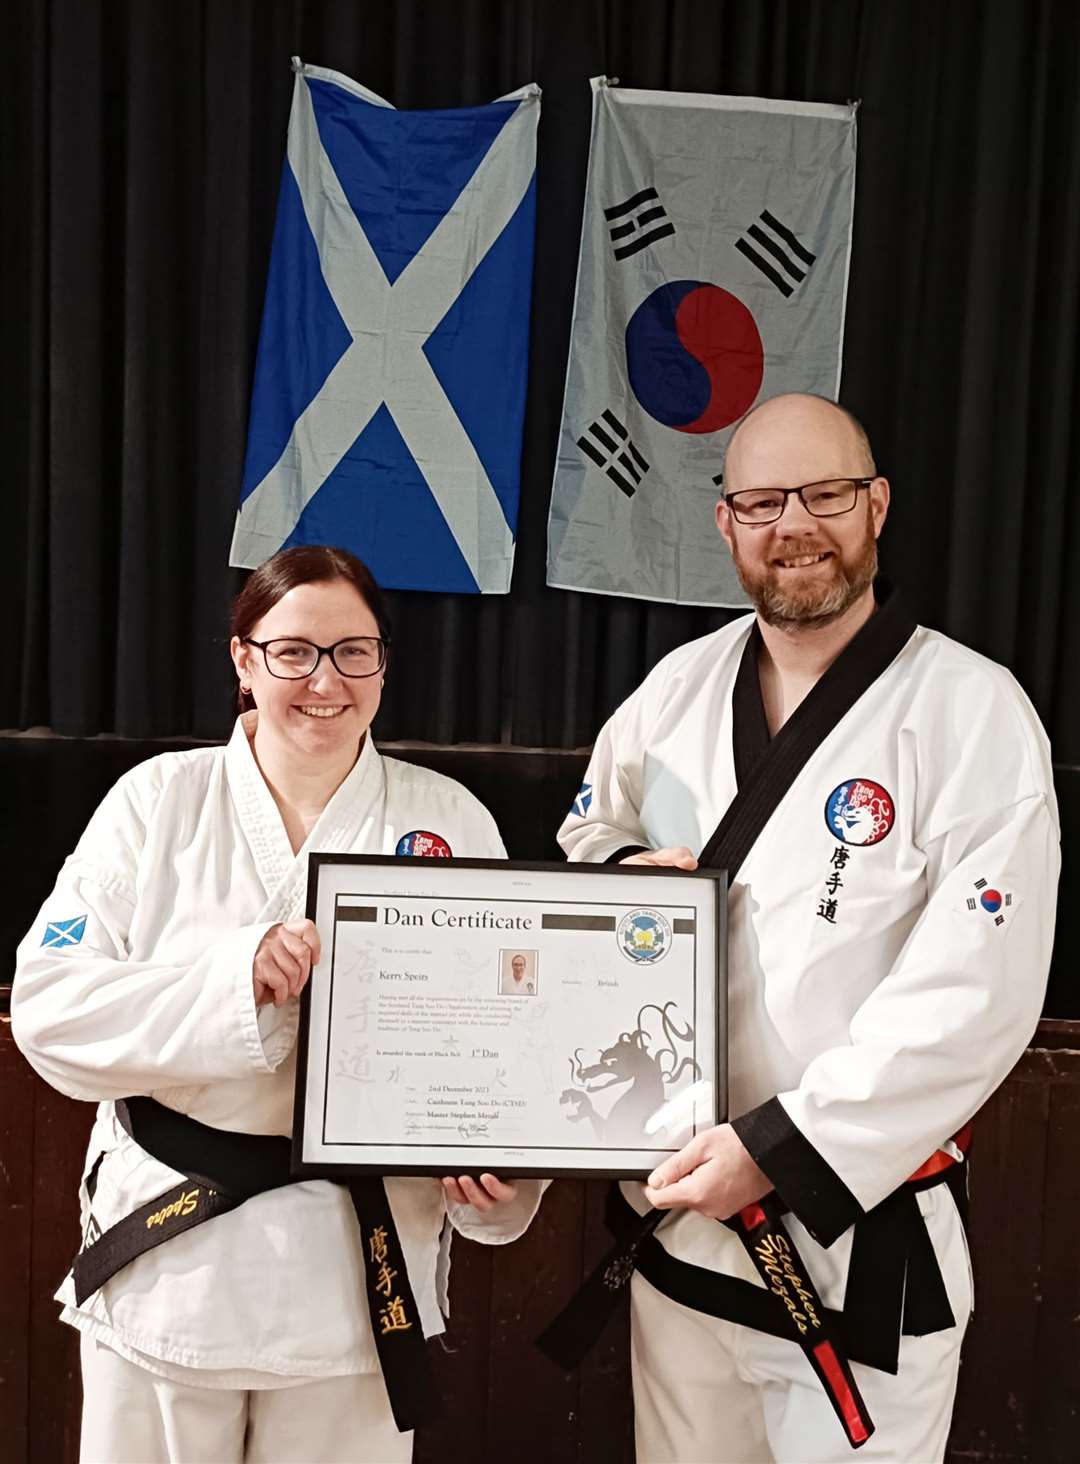 Kerry Speirs being presented with her black belt certificate by Stephen Mezals.